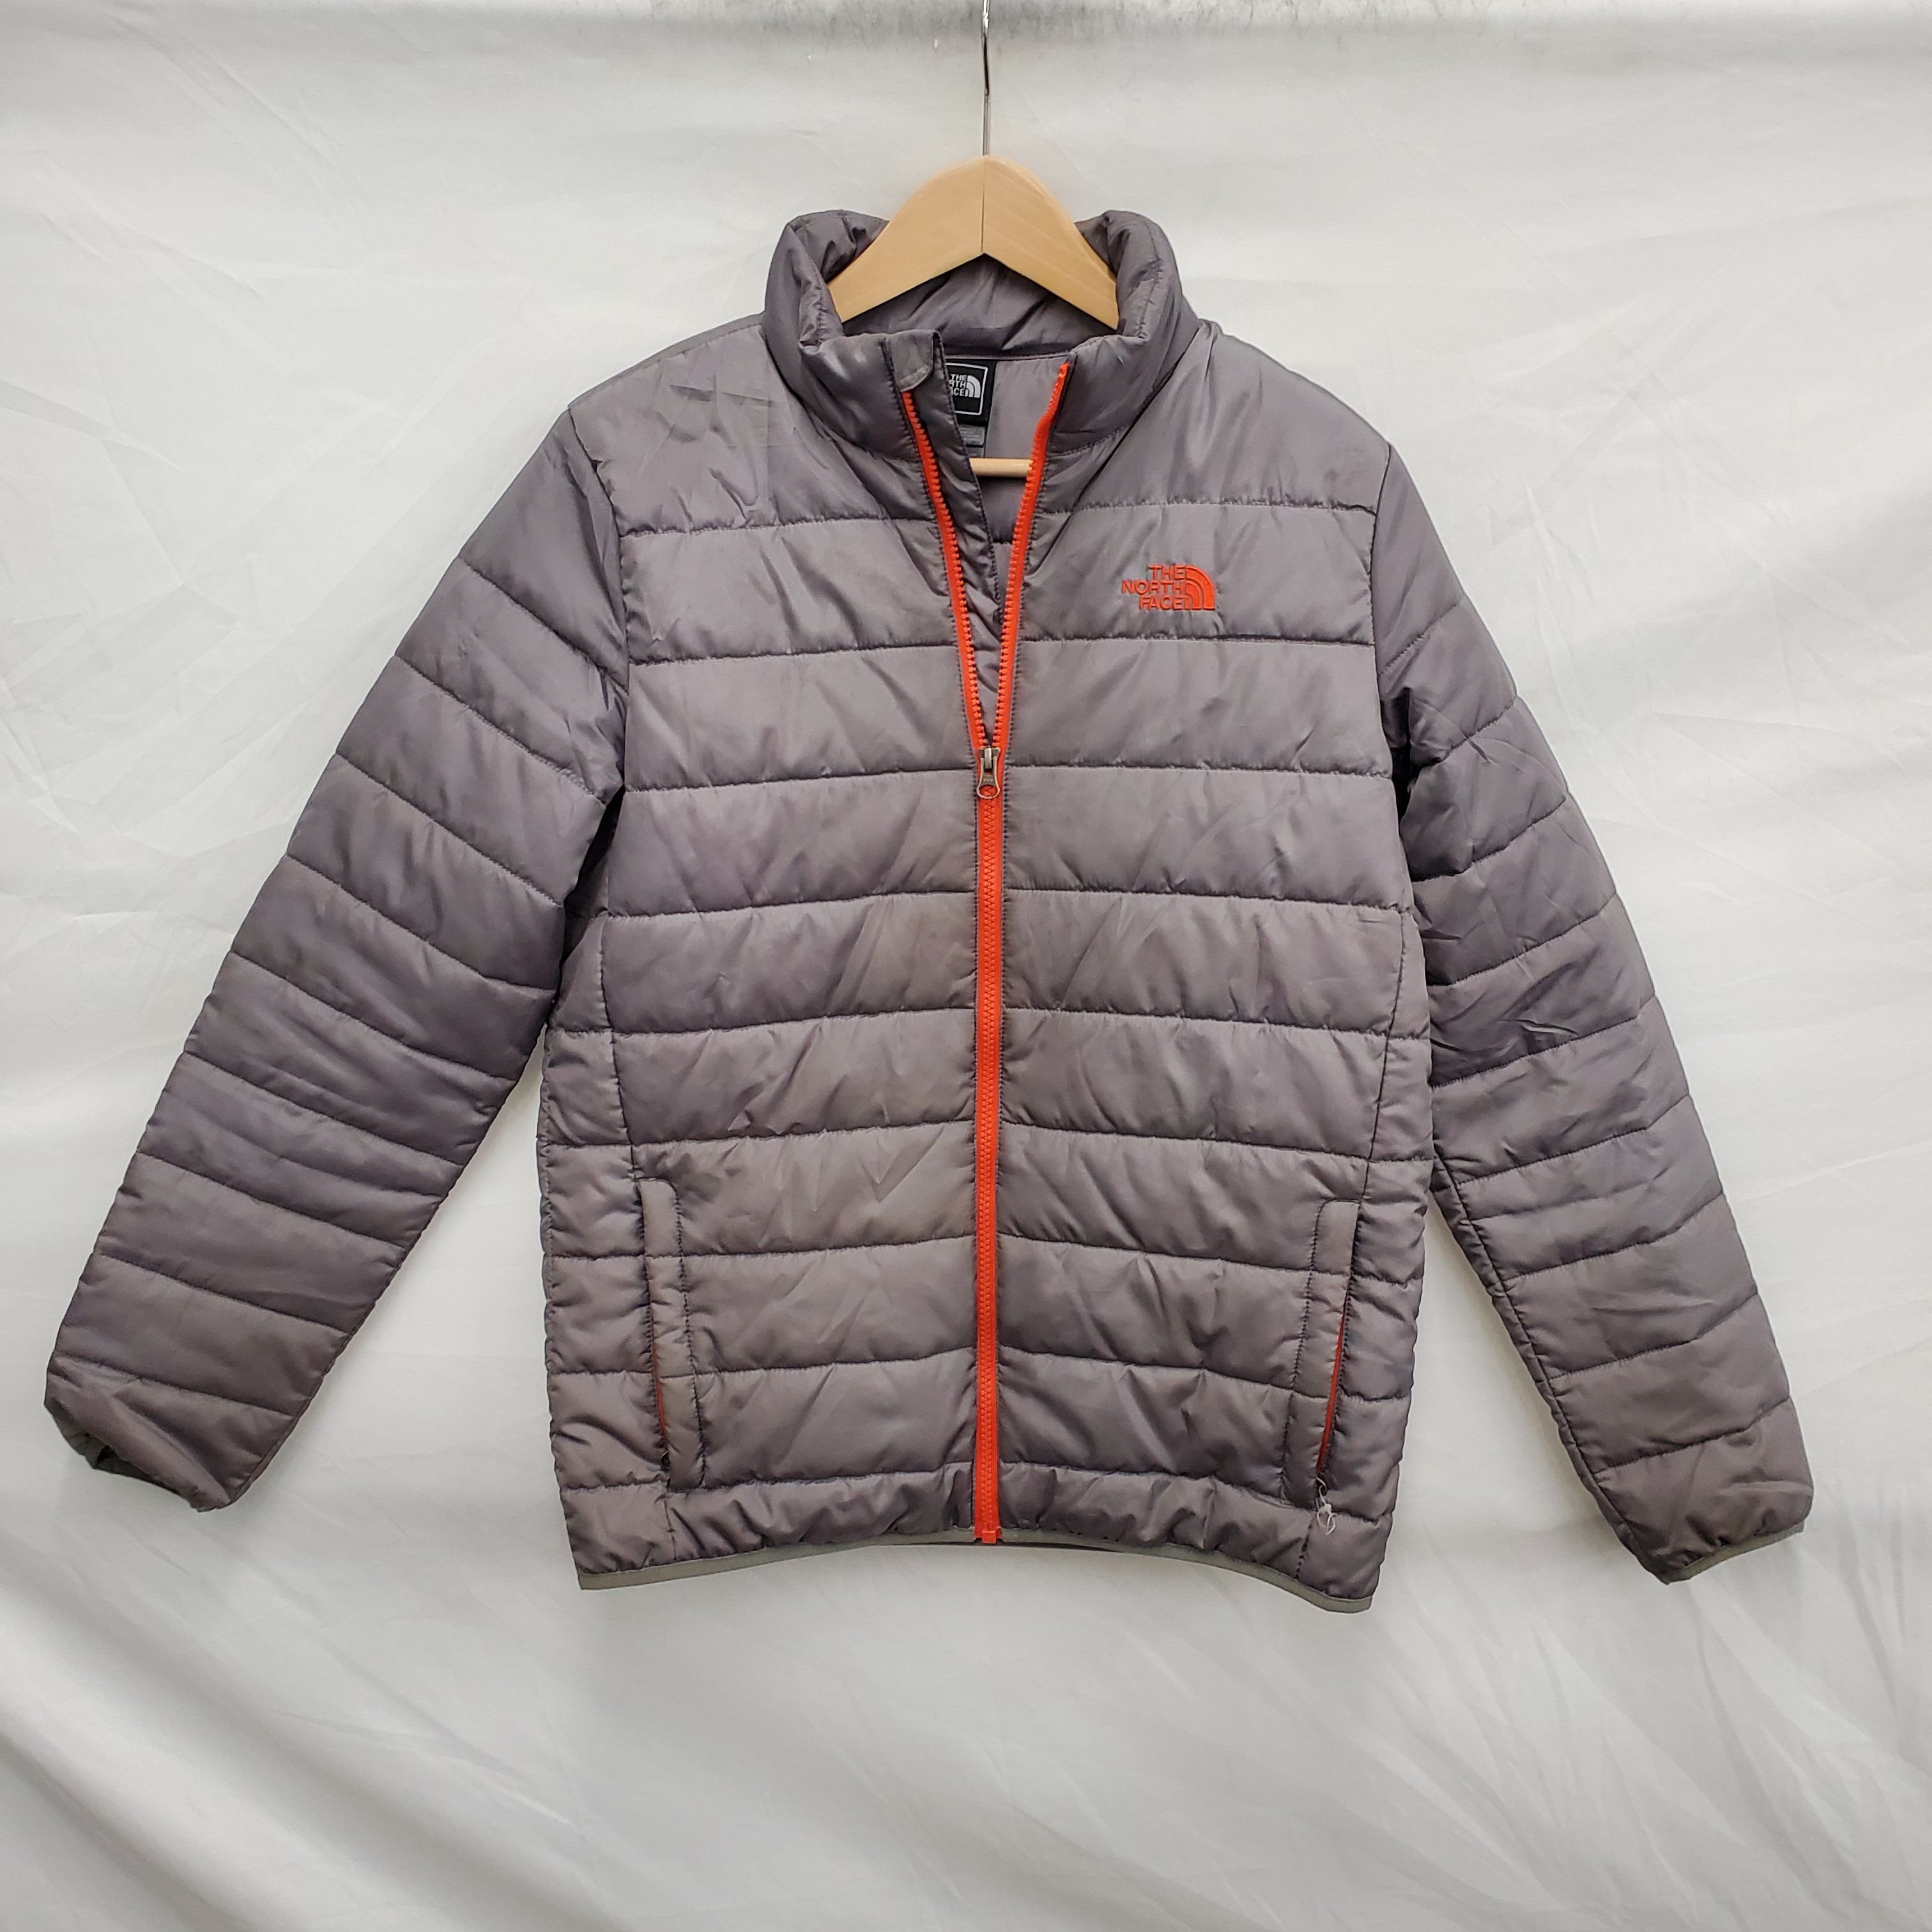 Buy the The North Face Boys Grey Puffer Jacket Size XL